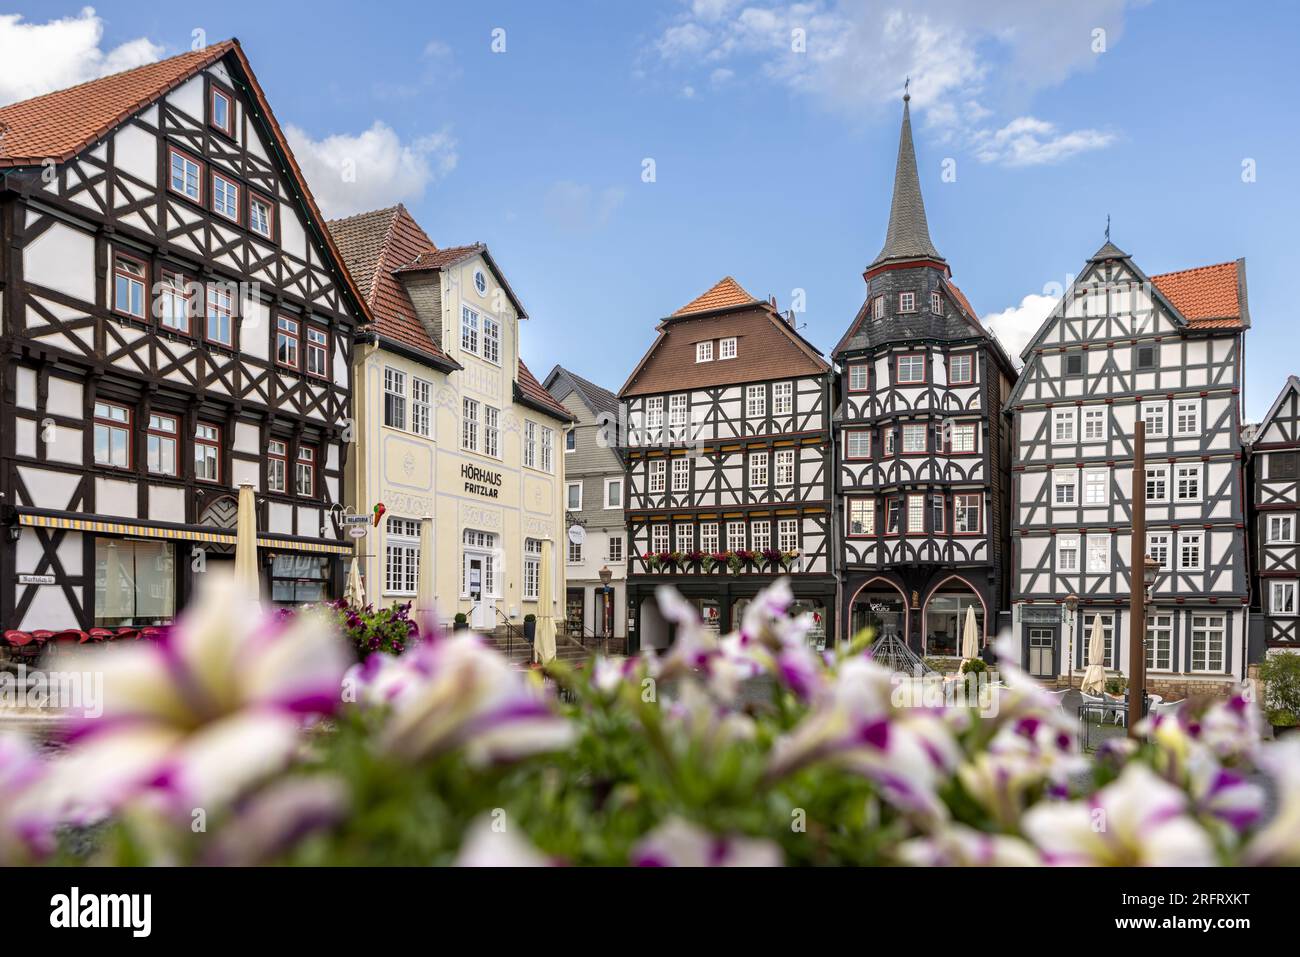 The market square with old half-timbered town houses in the historical medieval center of the town Fritzlar, Hesse, Germany Stock Photo